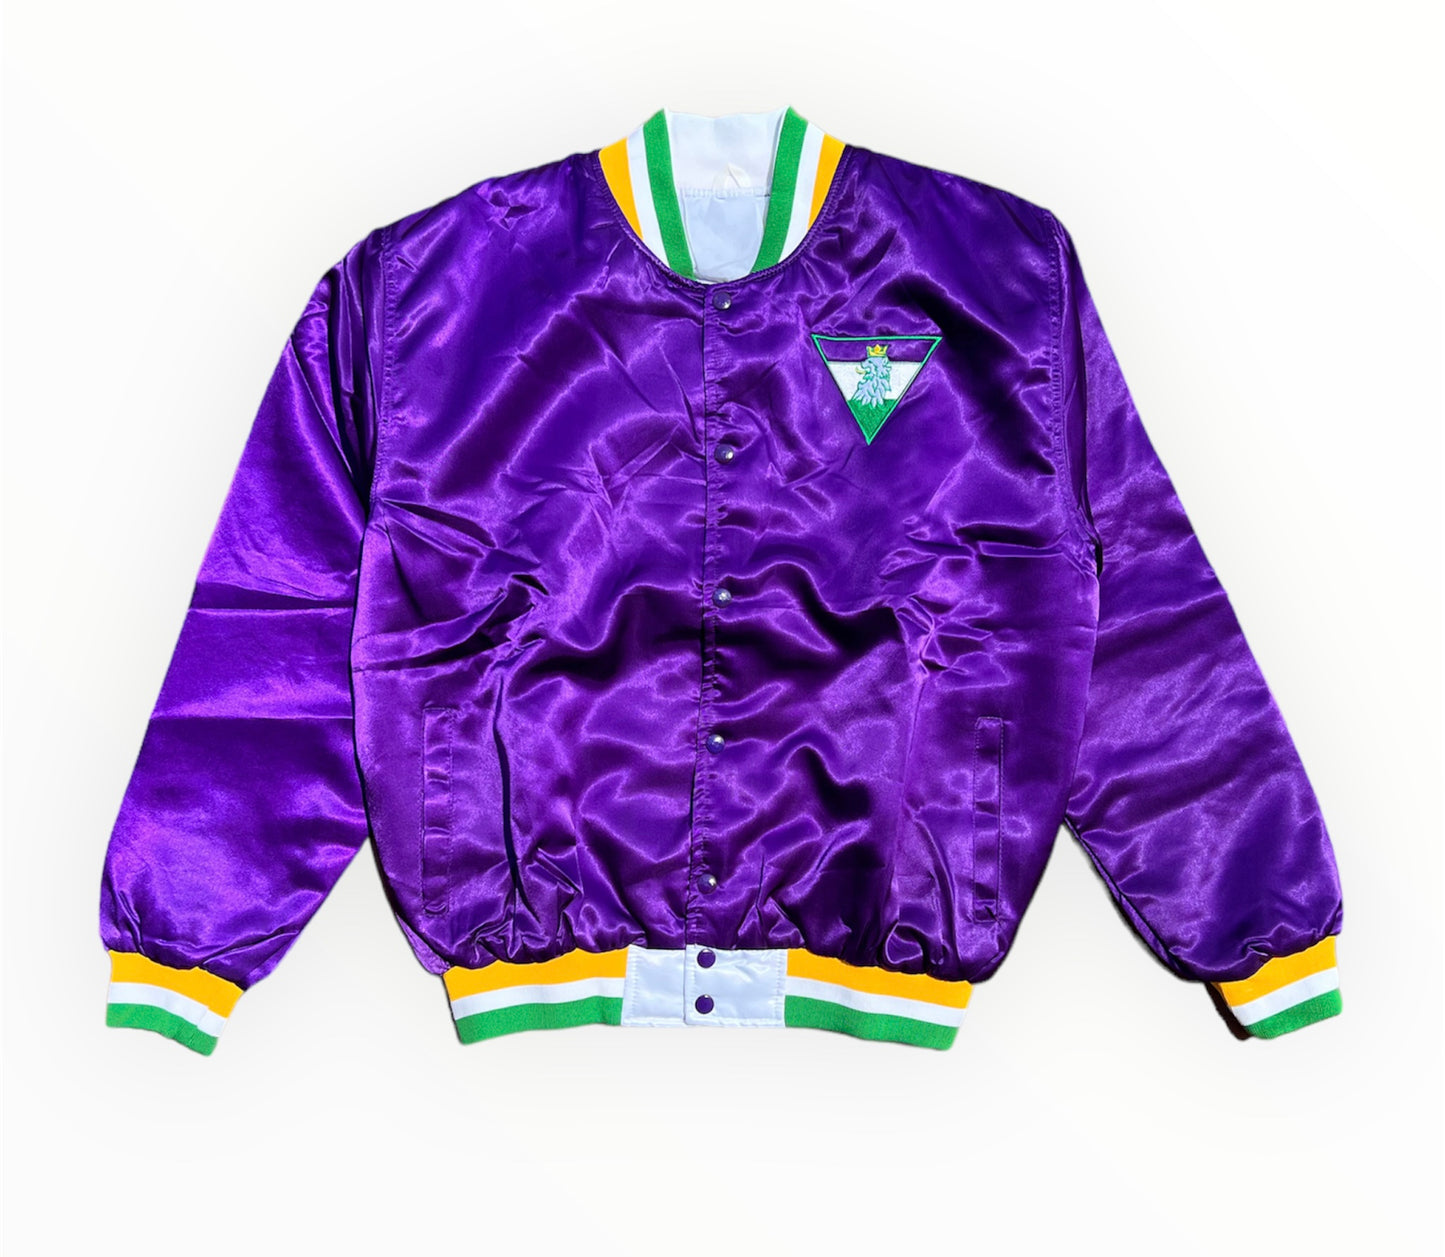 Front View of Royalty10 Mardi Gras '20 Satin Bomber Jacket in Regal Purple with Lion and Carnival Embroidery